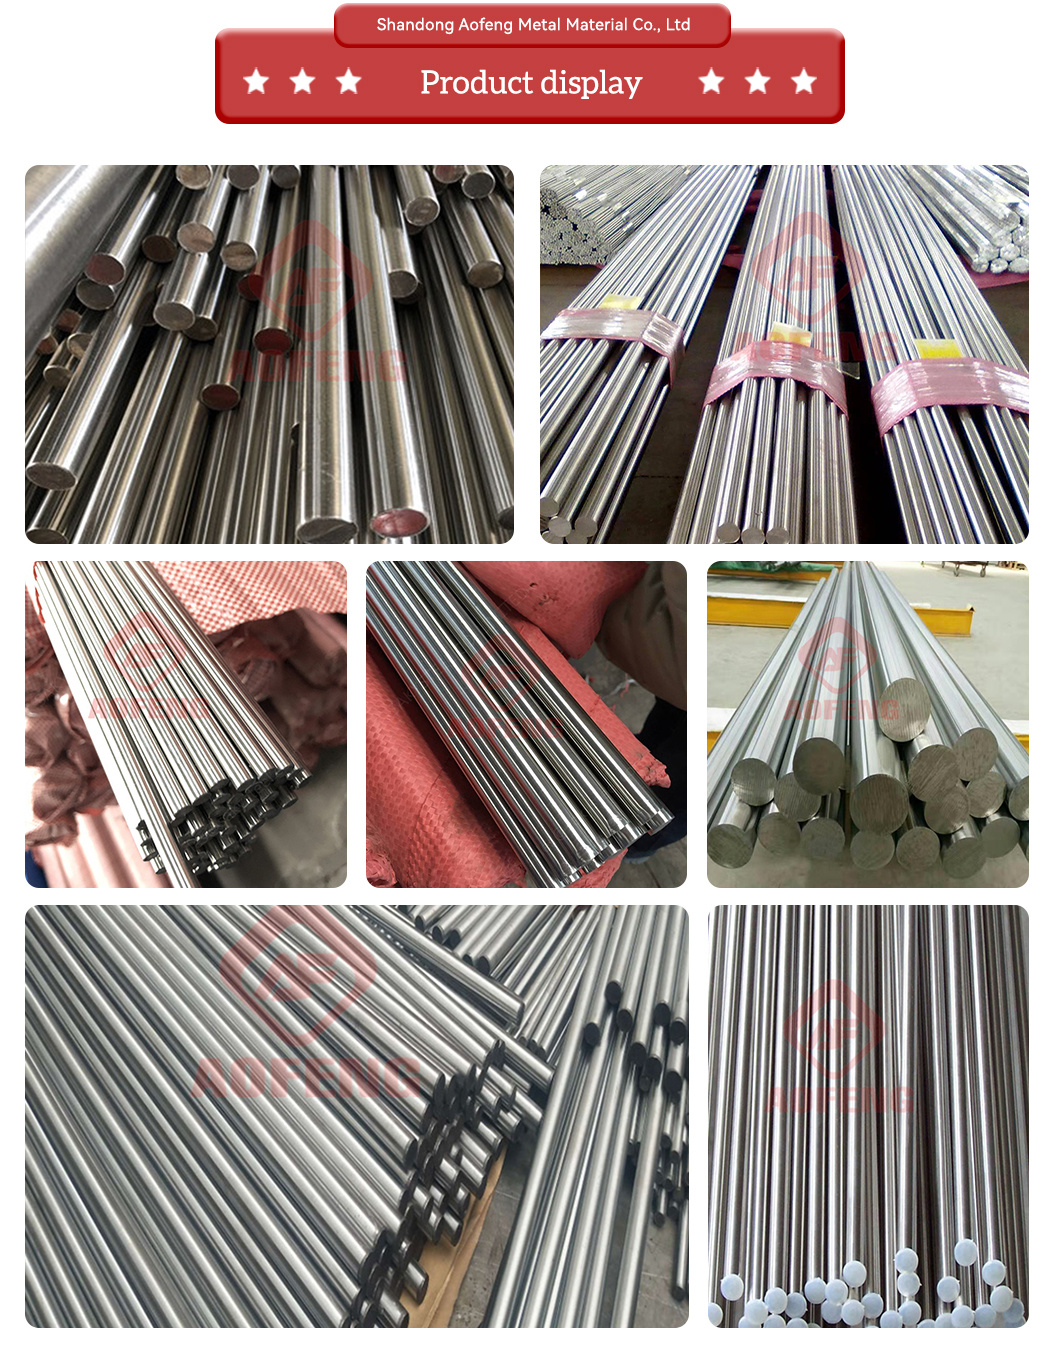 Stainless Steel Rod 254smo 6FT 316ti 1/4 Inch 5/8 Inch 4mm 9mm 38mm 90mm Diameter Stainless Steel Rod 316ti